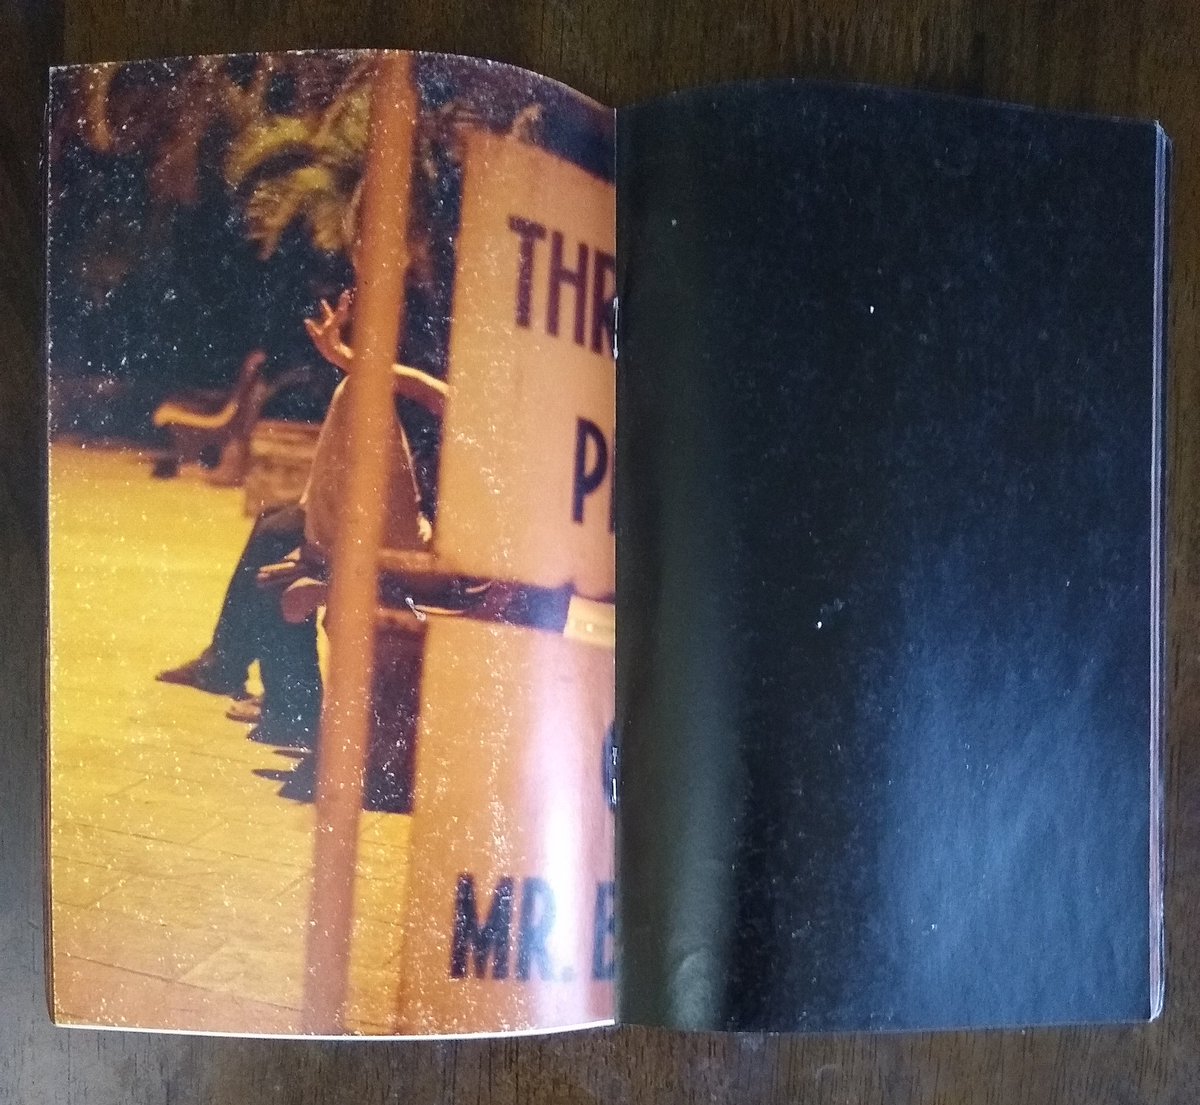 I love everything about it, even the odd format - square images printed full-bleed and across the gutter - and it's influenced my work quite a bit, as you can see from the photobook dummy I've been working on for a while now.